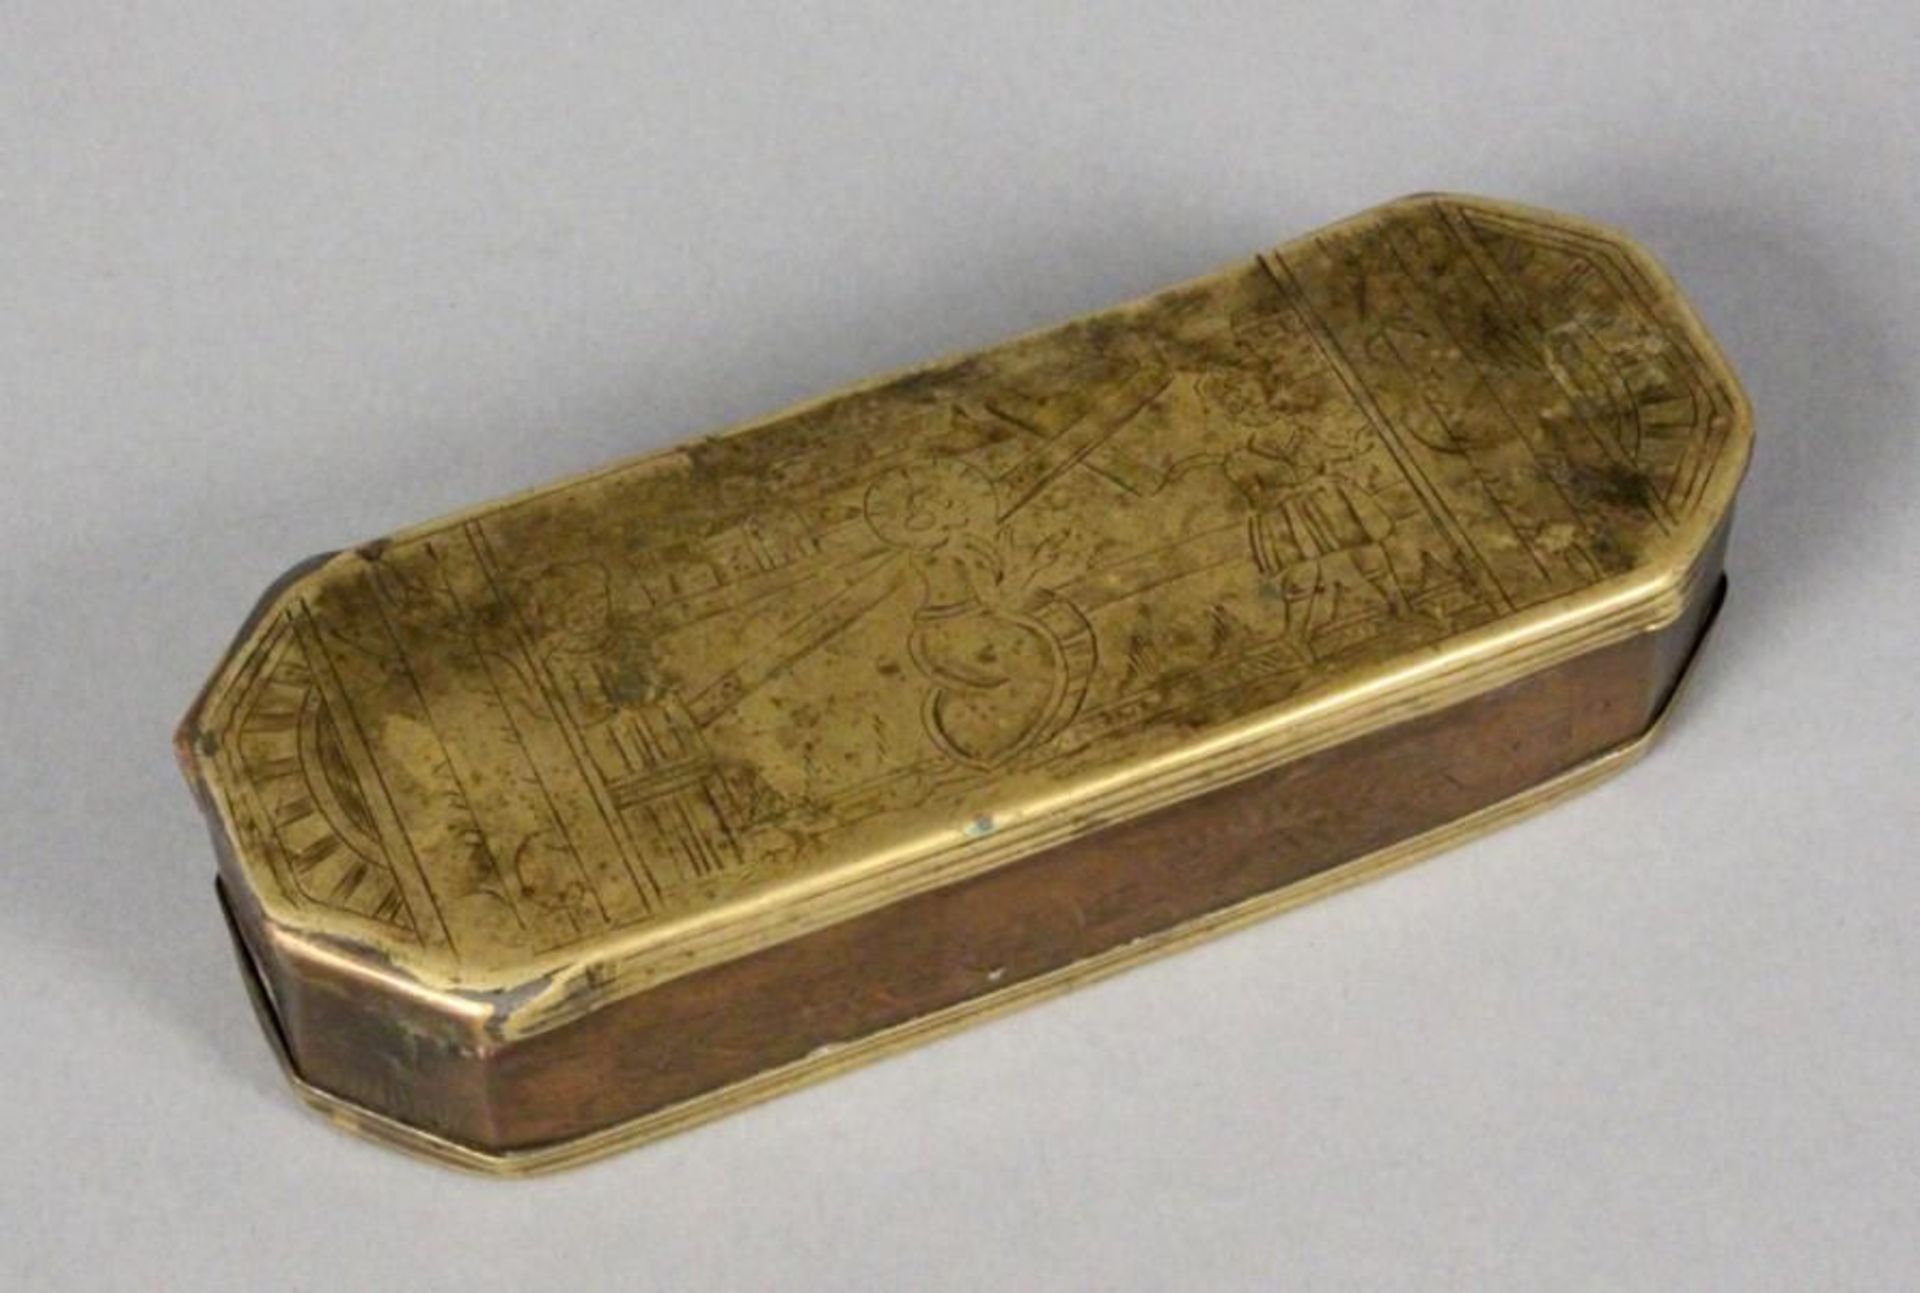 A TOBACCO BOX probably Iserlohn, 18th century Brass and copper, with engraved decor, length 15.2cm.